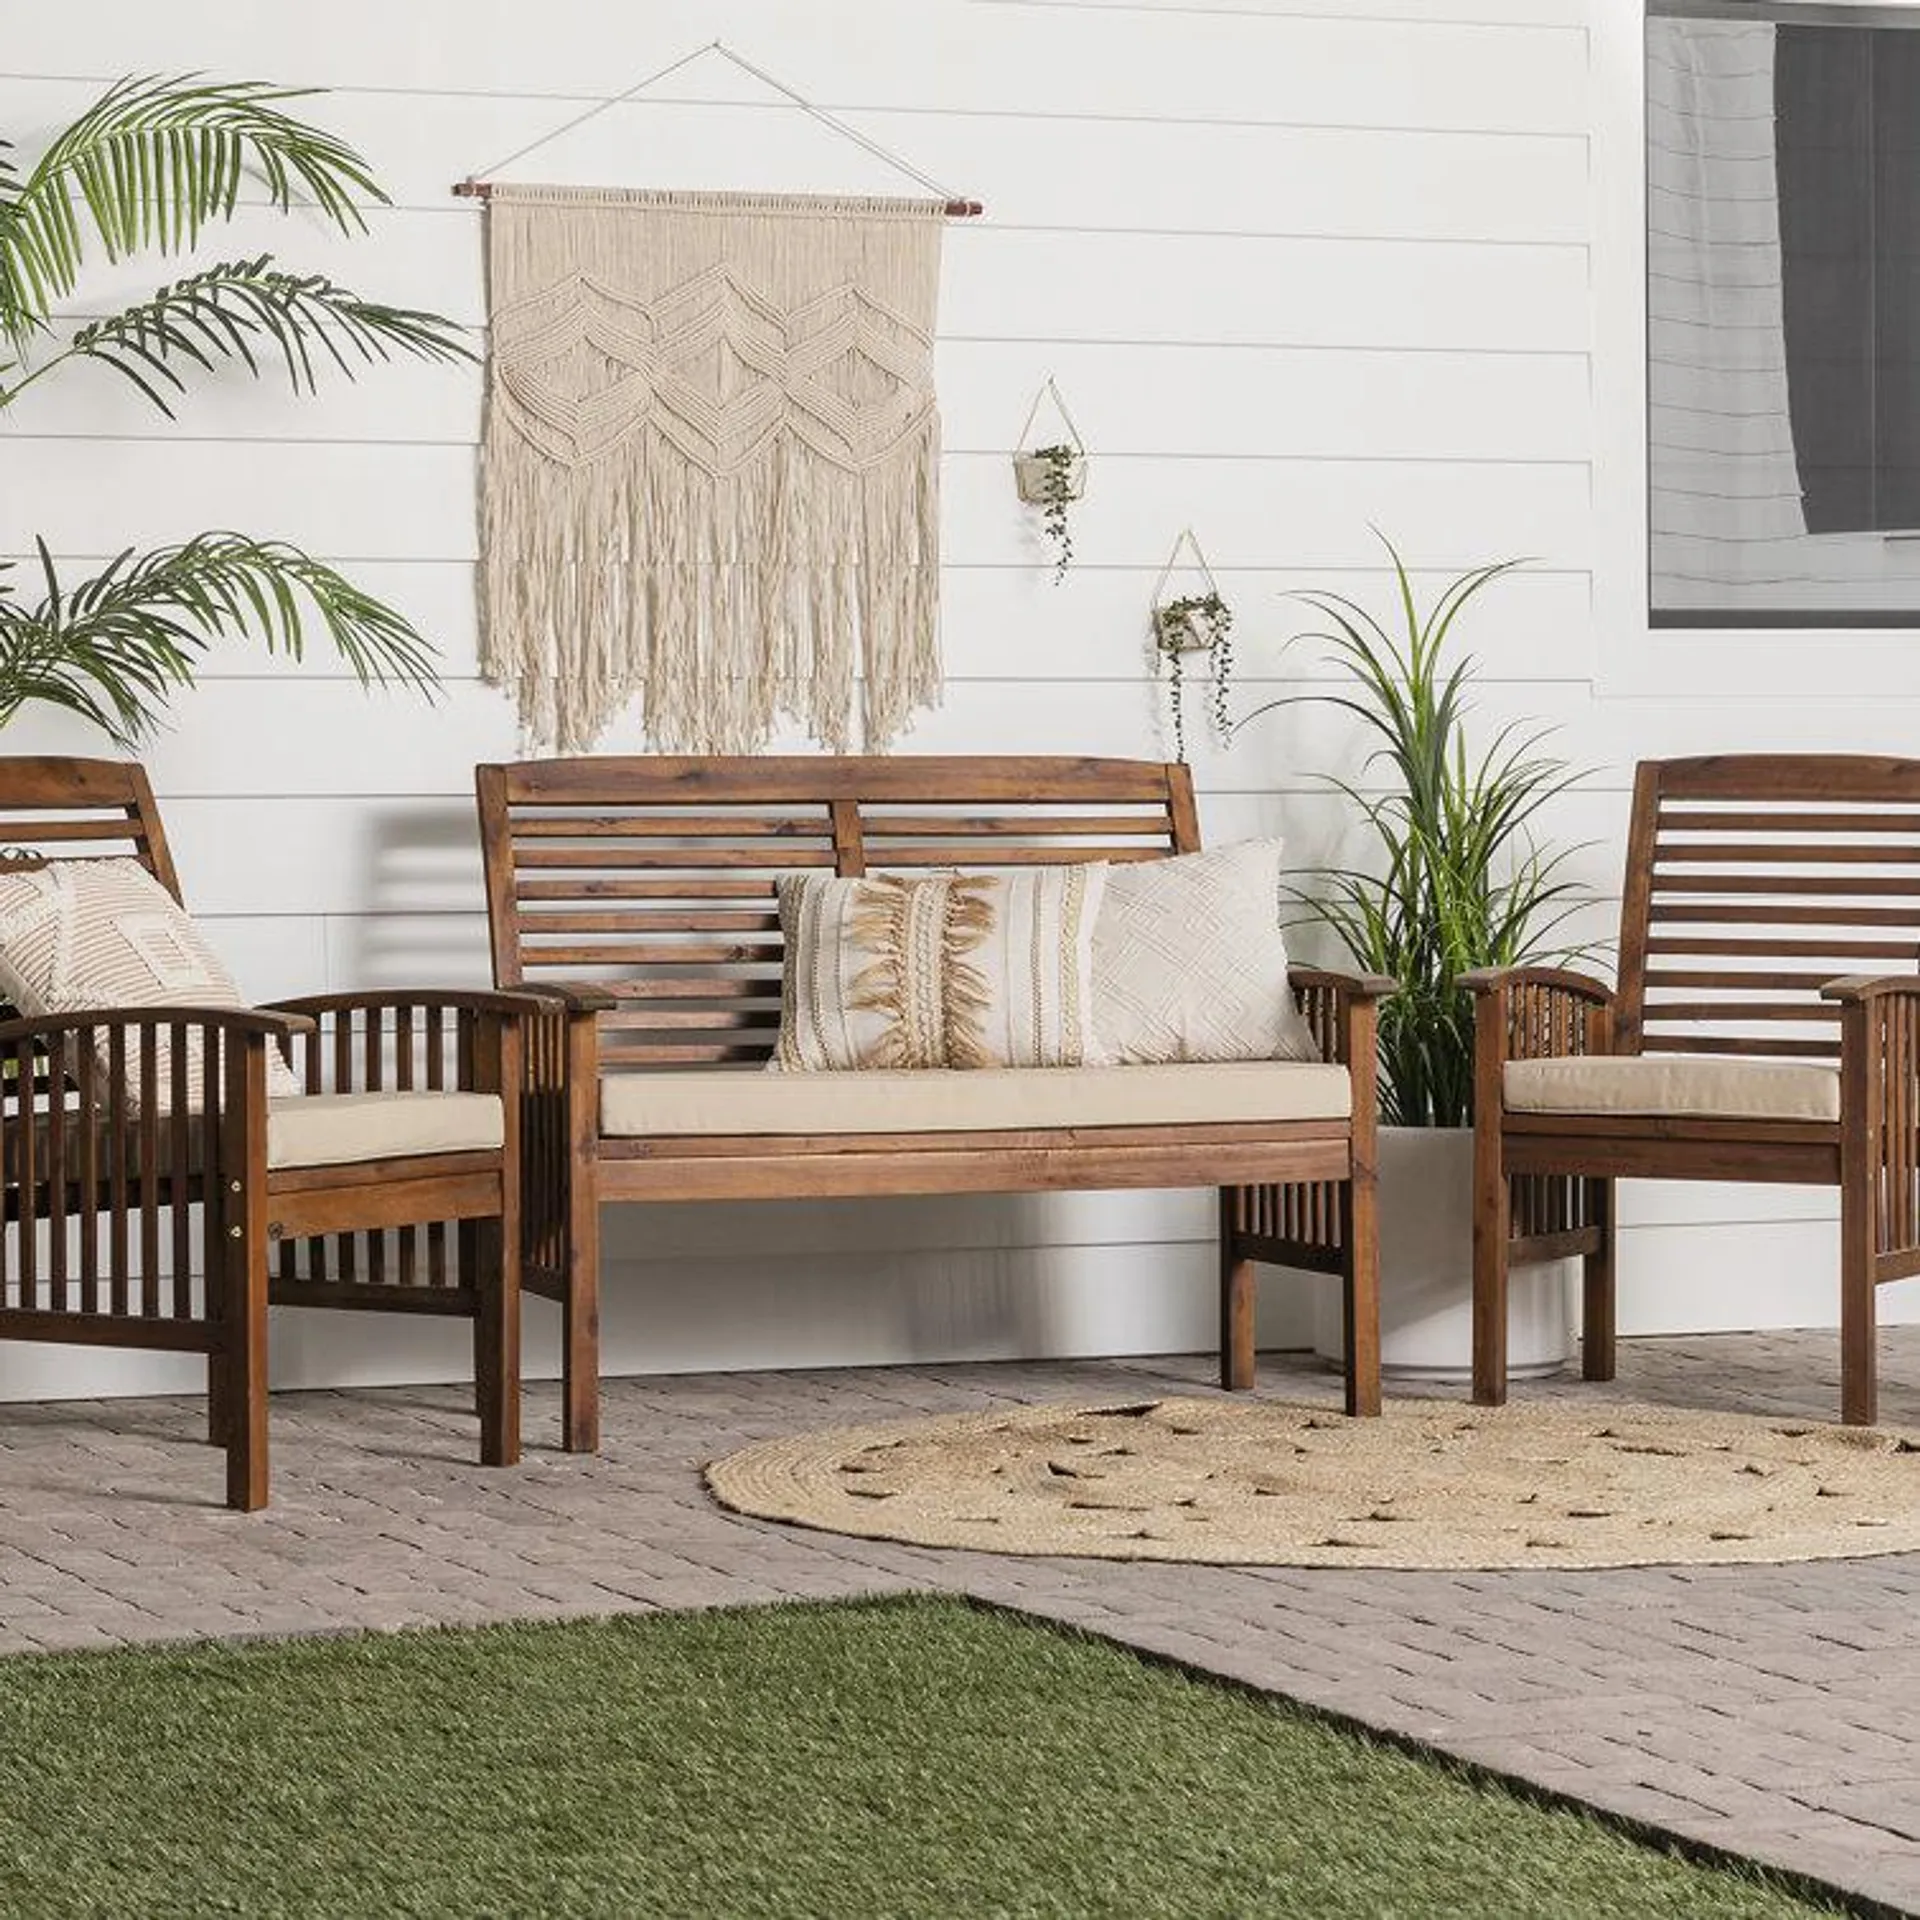 4 - Person Outdoor Seating Group with Cushions